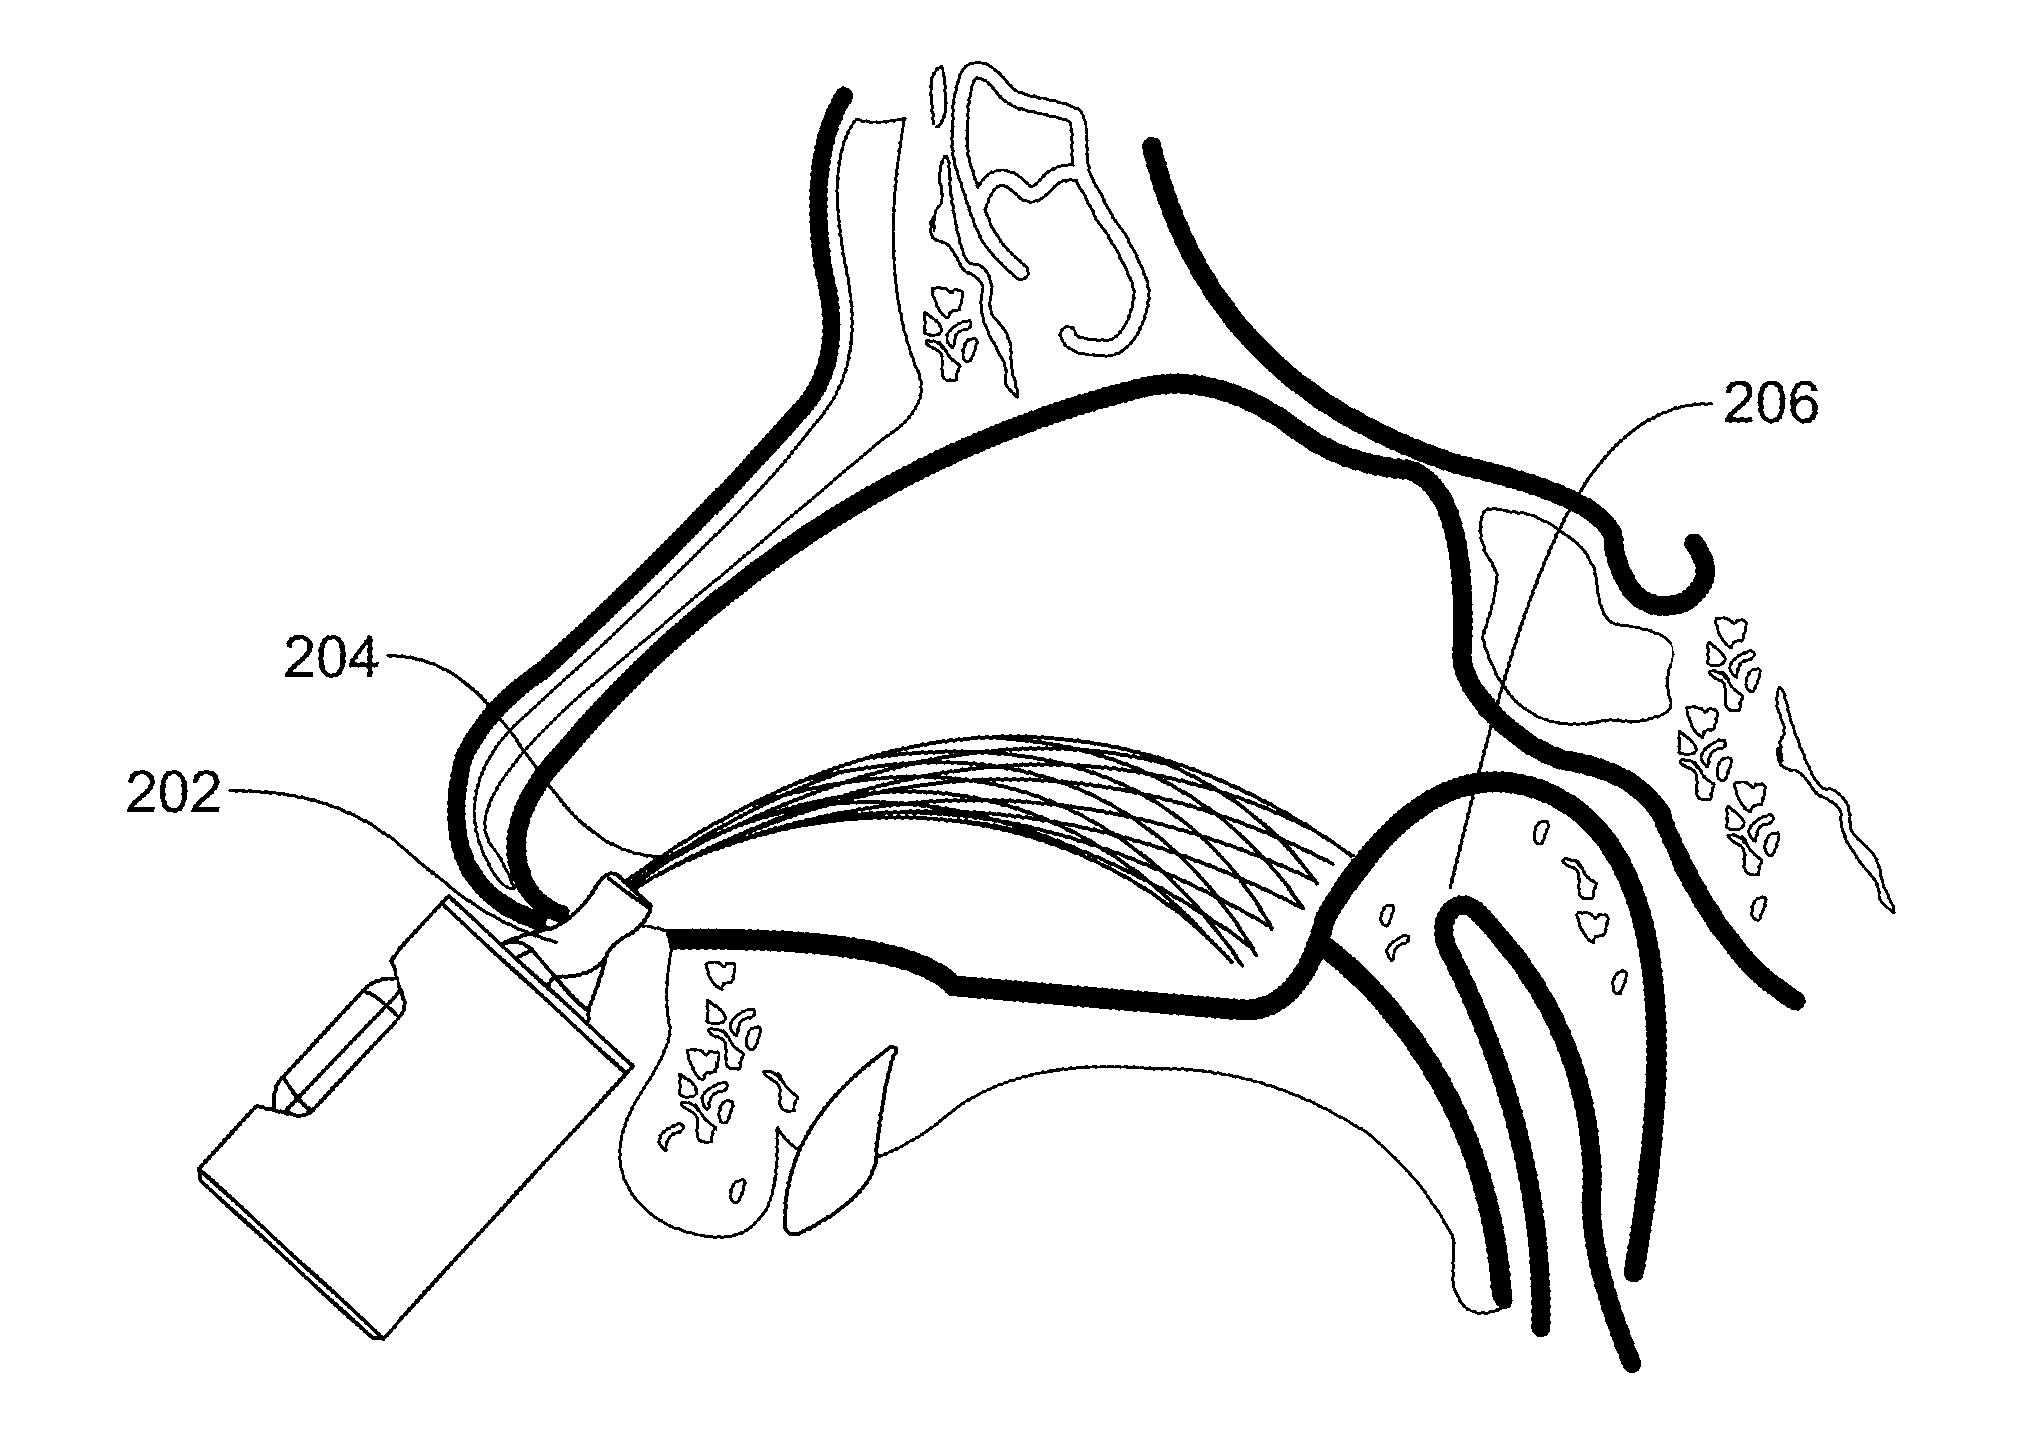 Nasal Delivery Device and Methods of Use